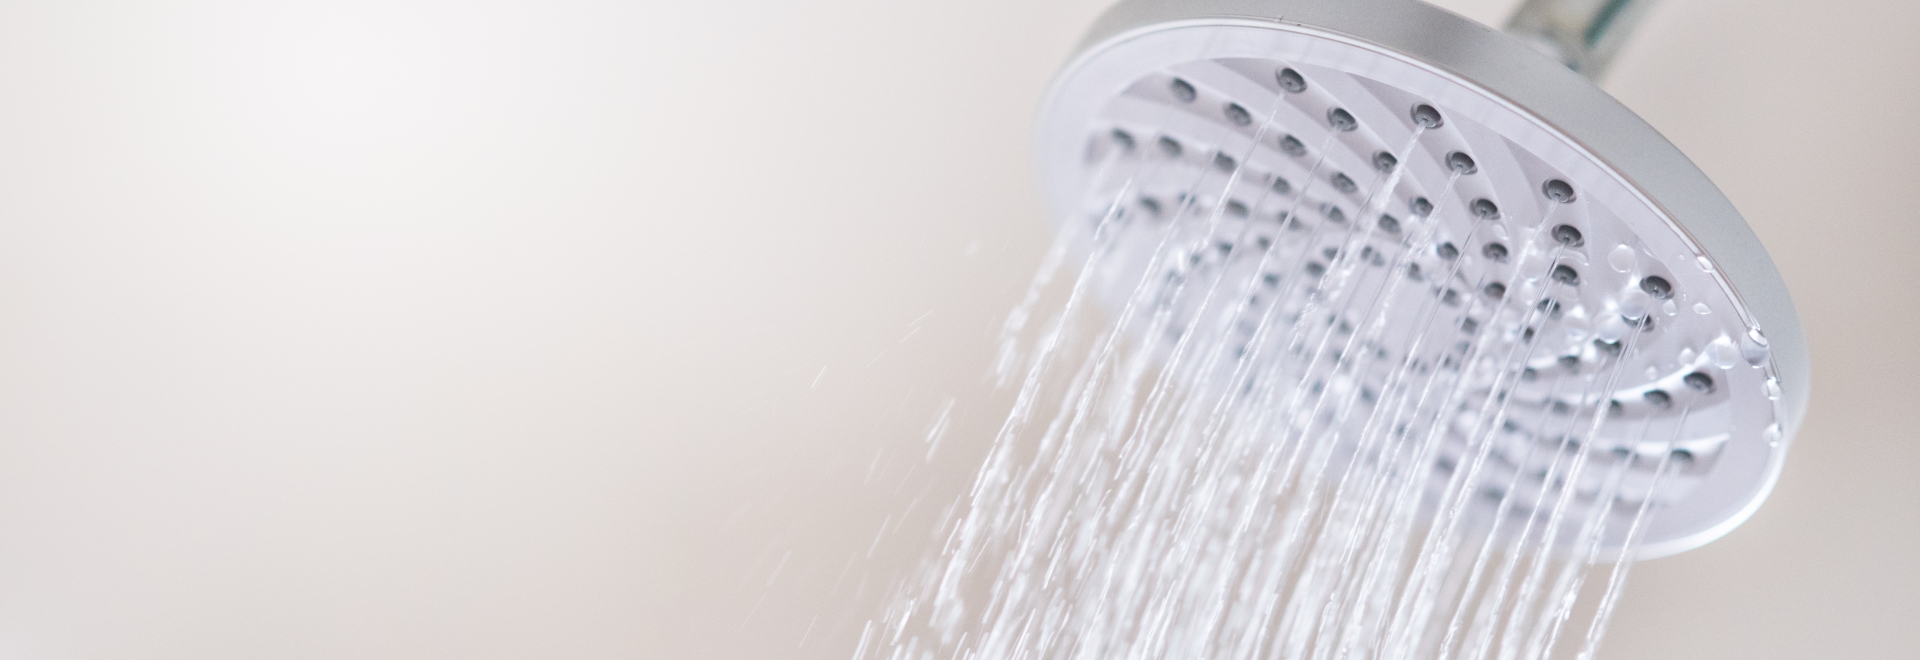 hot water coming out of shower head